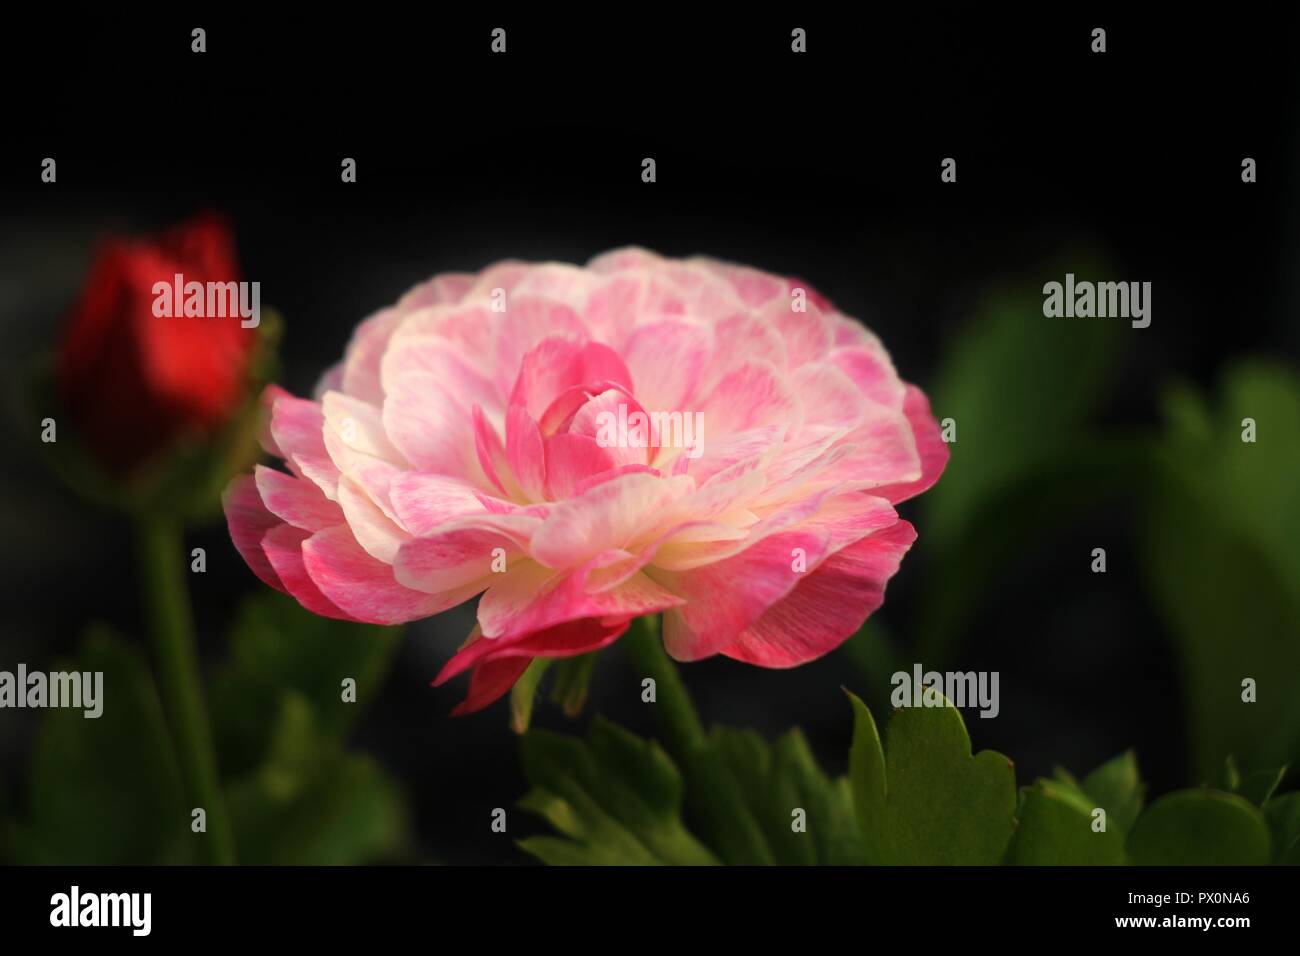 Pink and white Ranunculus flower against green leaves and black background. Stock Photo